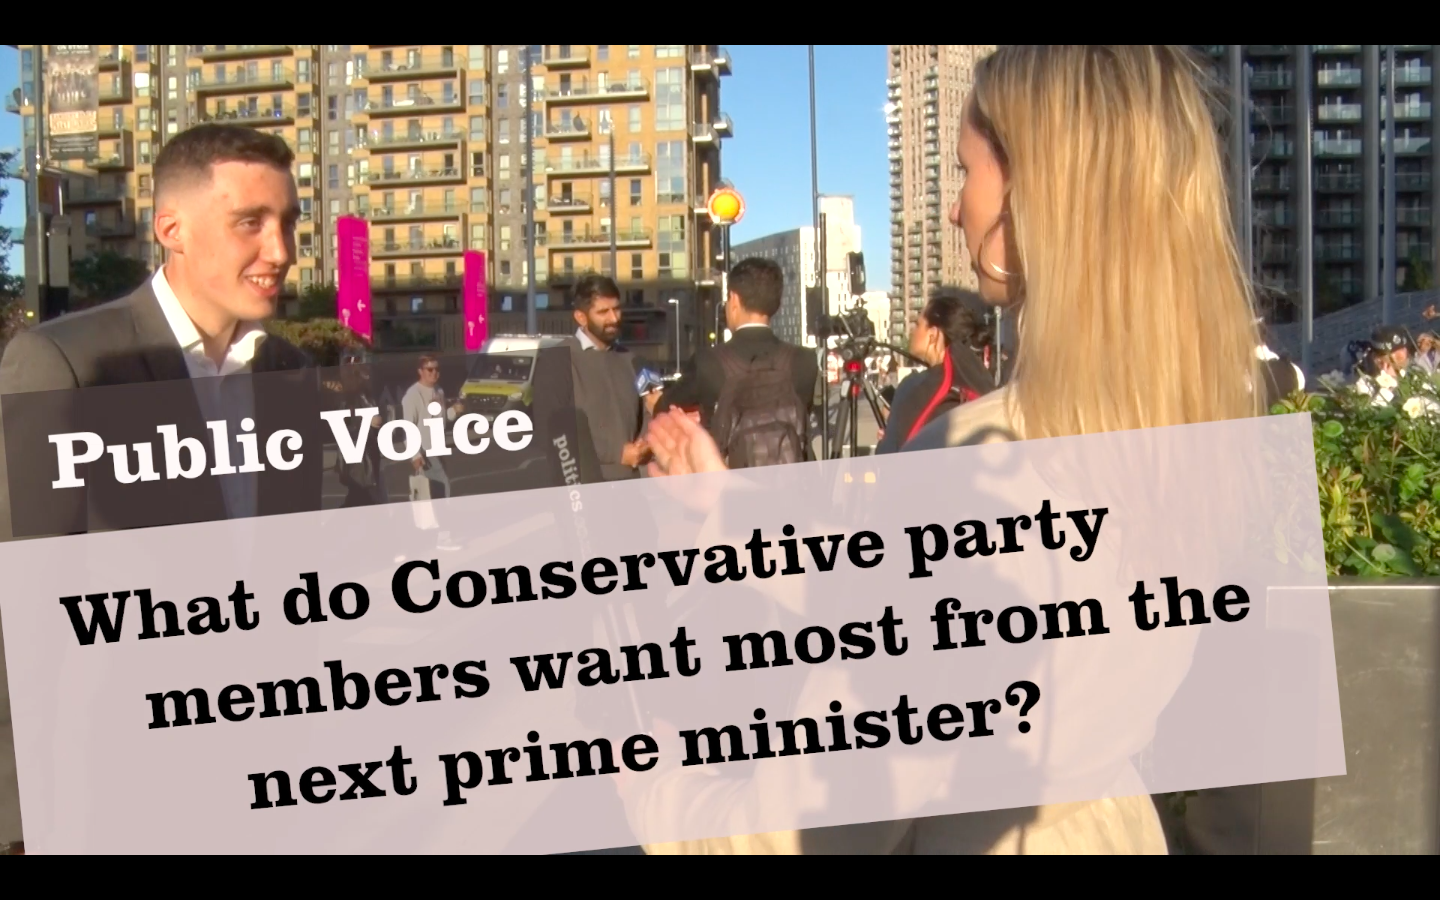 Public Voice: What do Conservative members want most from the next PM?